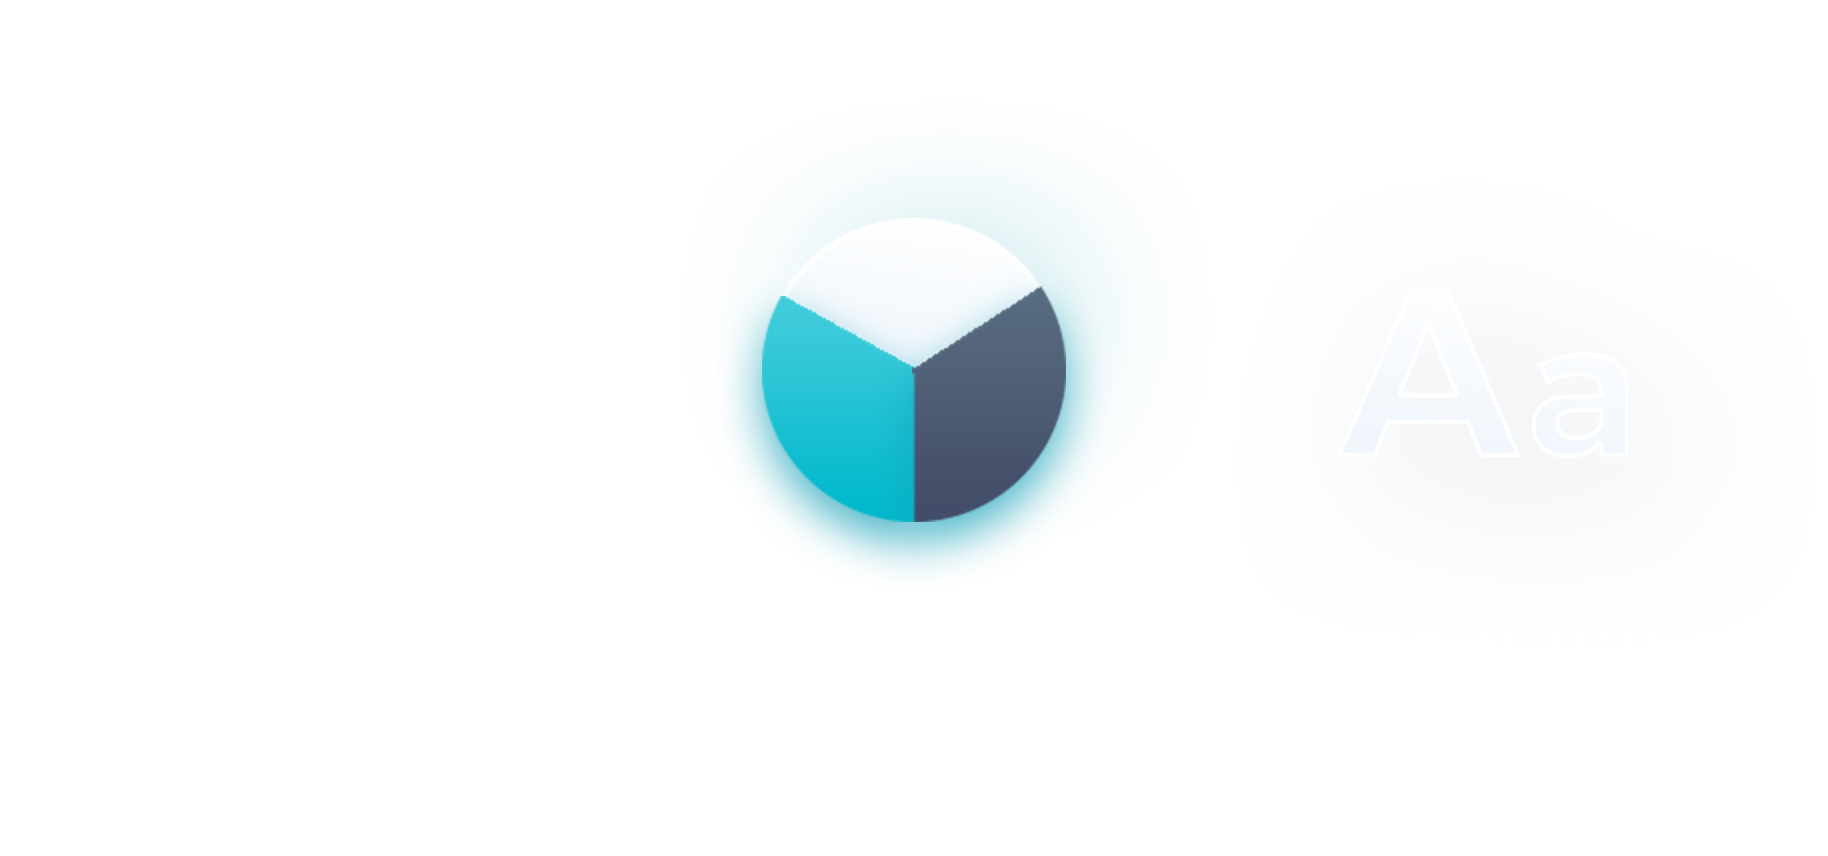 Includes the ICON logo, colours, and typography